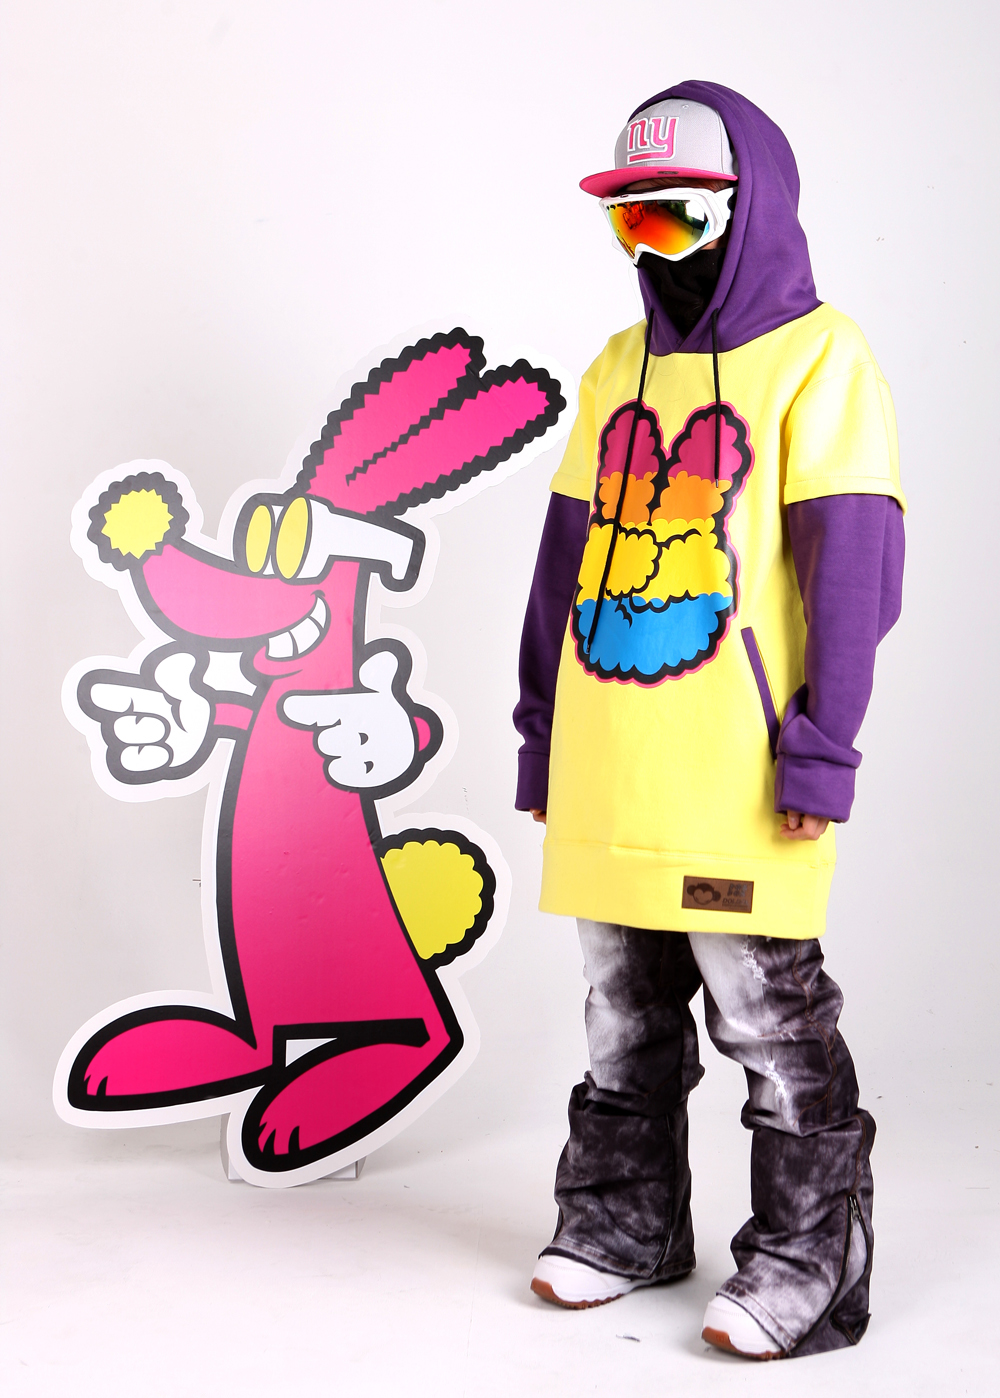 #Snowboard #kangaroo #characterdesign #doldoldesign #cottoncandy #candyd #lolypoly #application   #collaboration #돌돌디자인